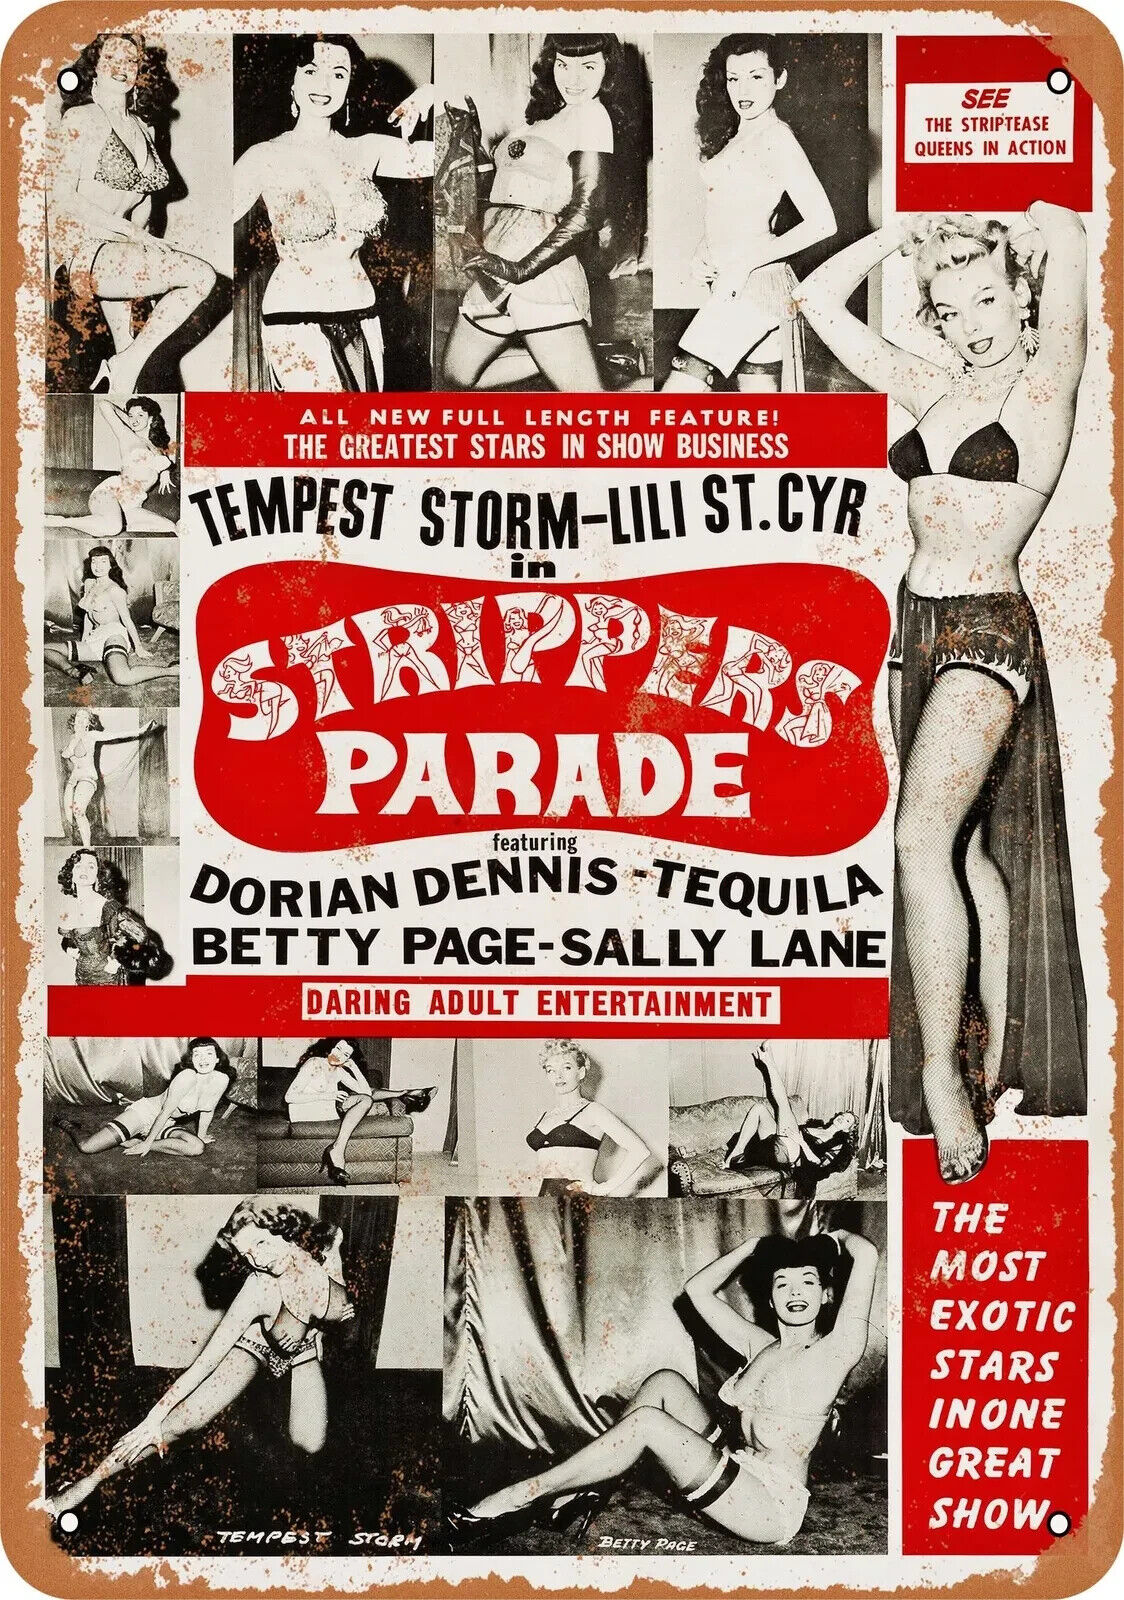 1956 Strippers Parade - Metal Sign - Vintage Look Reproduction- Fast 